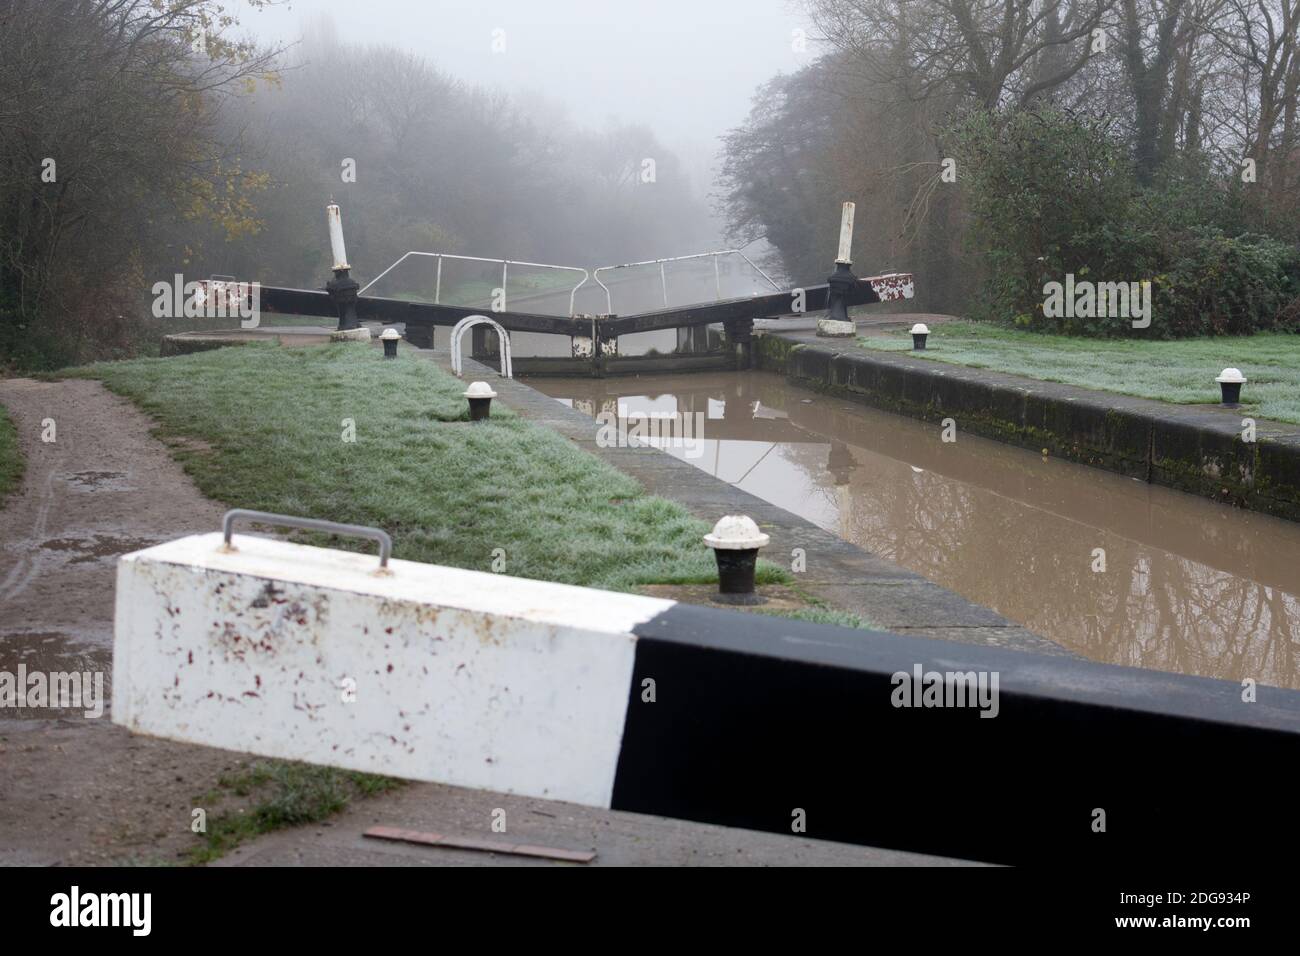 Warwick Top Lock (Cape Top Lock) on the Grand Union Canal on a foggy, frosty day in winter, Warwickshire, UK Stock Photo